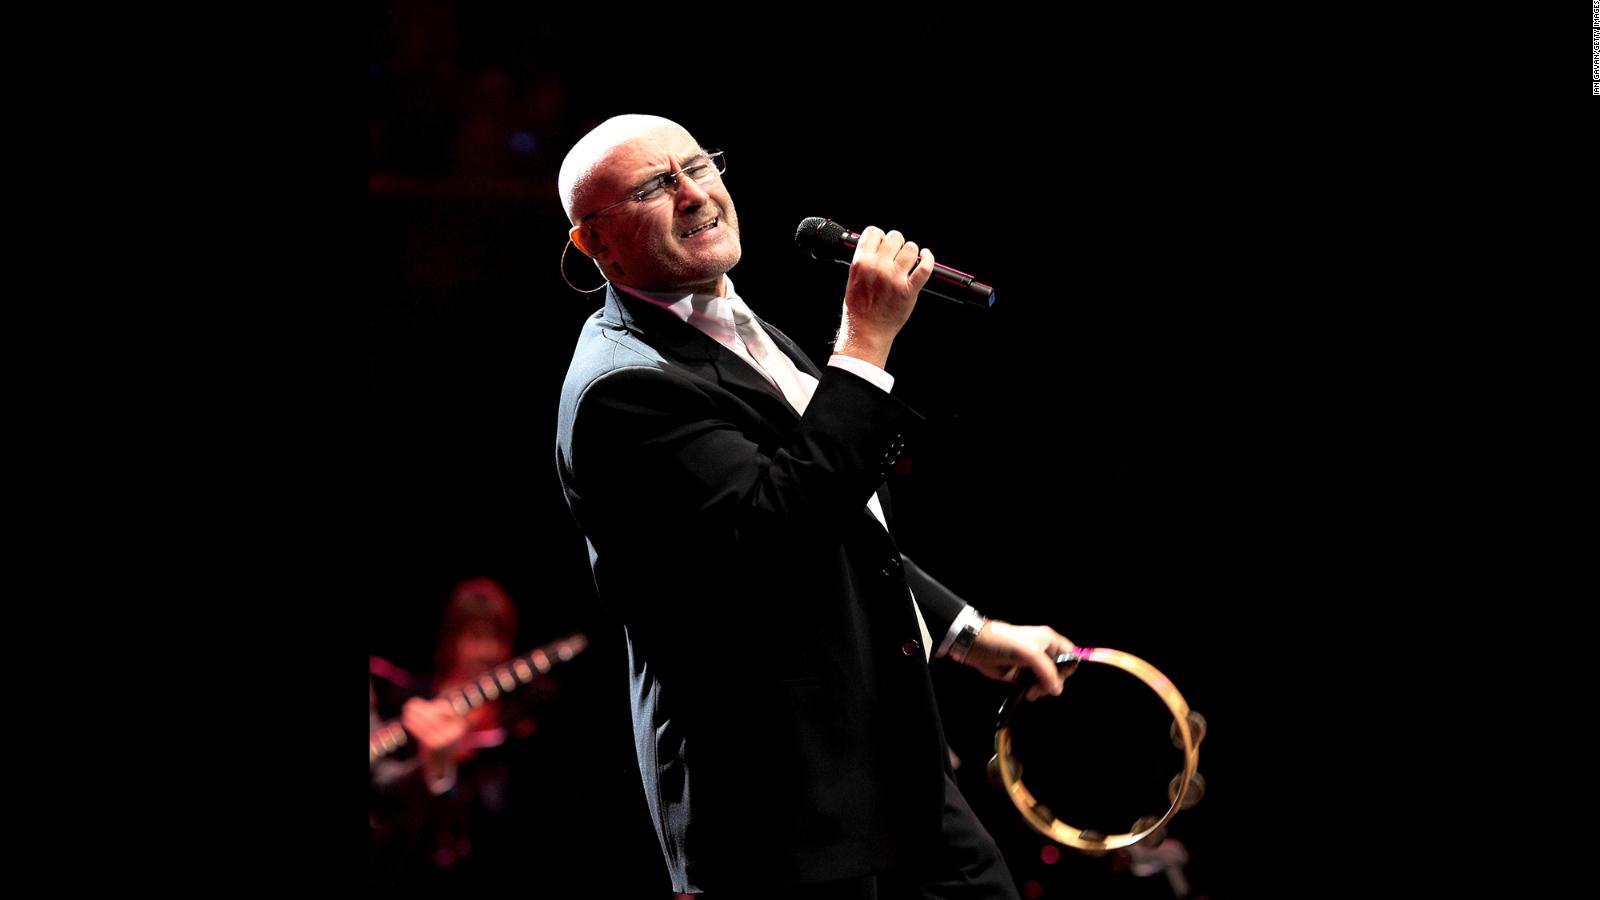 Phil Collins suffering from health problems, can 'barely hold' drum sticks